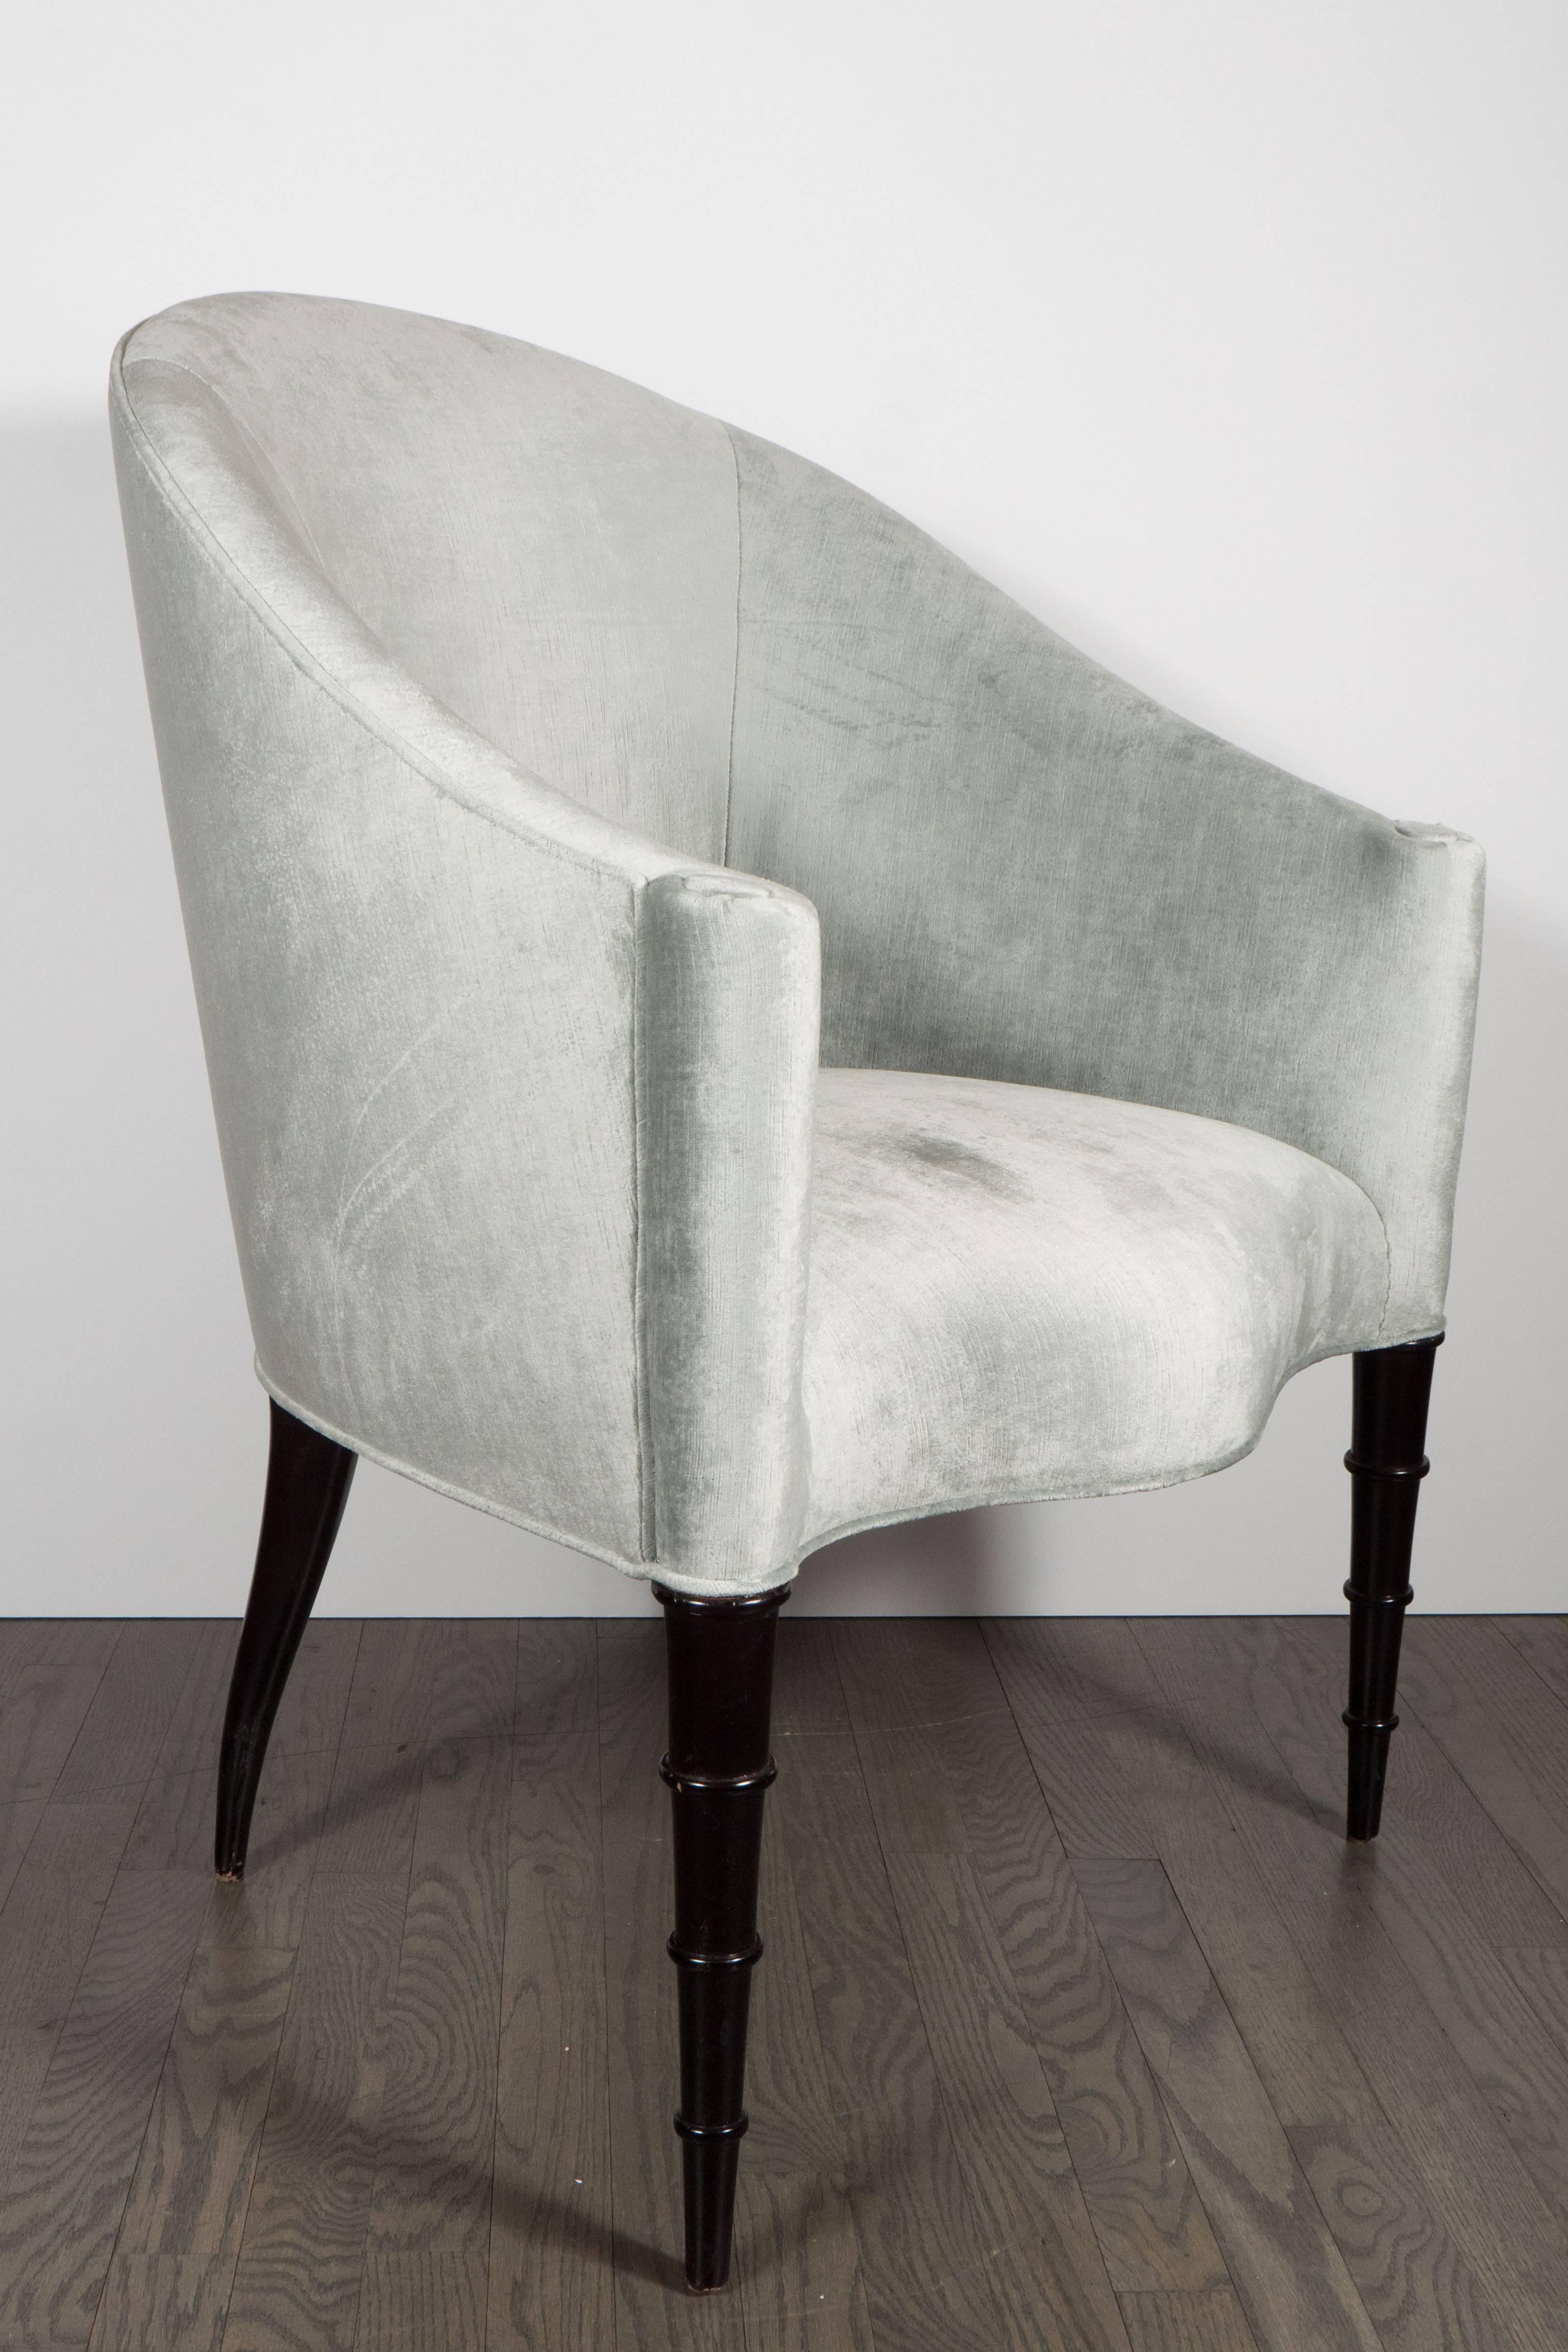 A pair of Hollywood Regency gondola chairs in pale grey platinum velvet upholstery. The legs are hand-rubbed ebonized walnut. Scroll detailing makes up the arm rests while sculptural front and splayed read legs lend to a sophisticated look. They